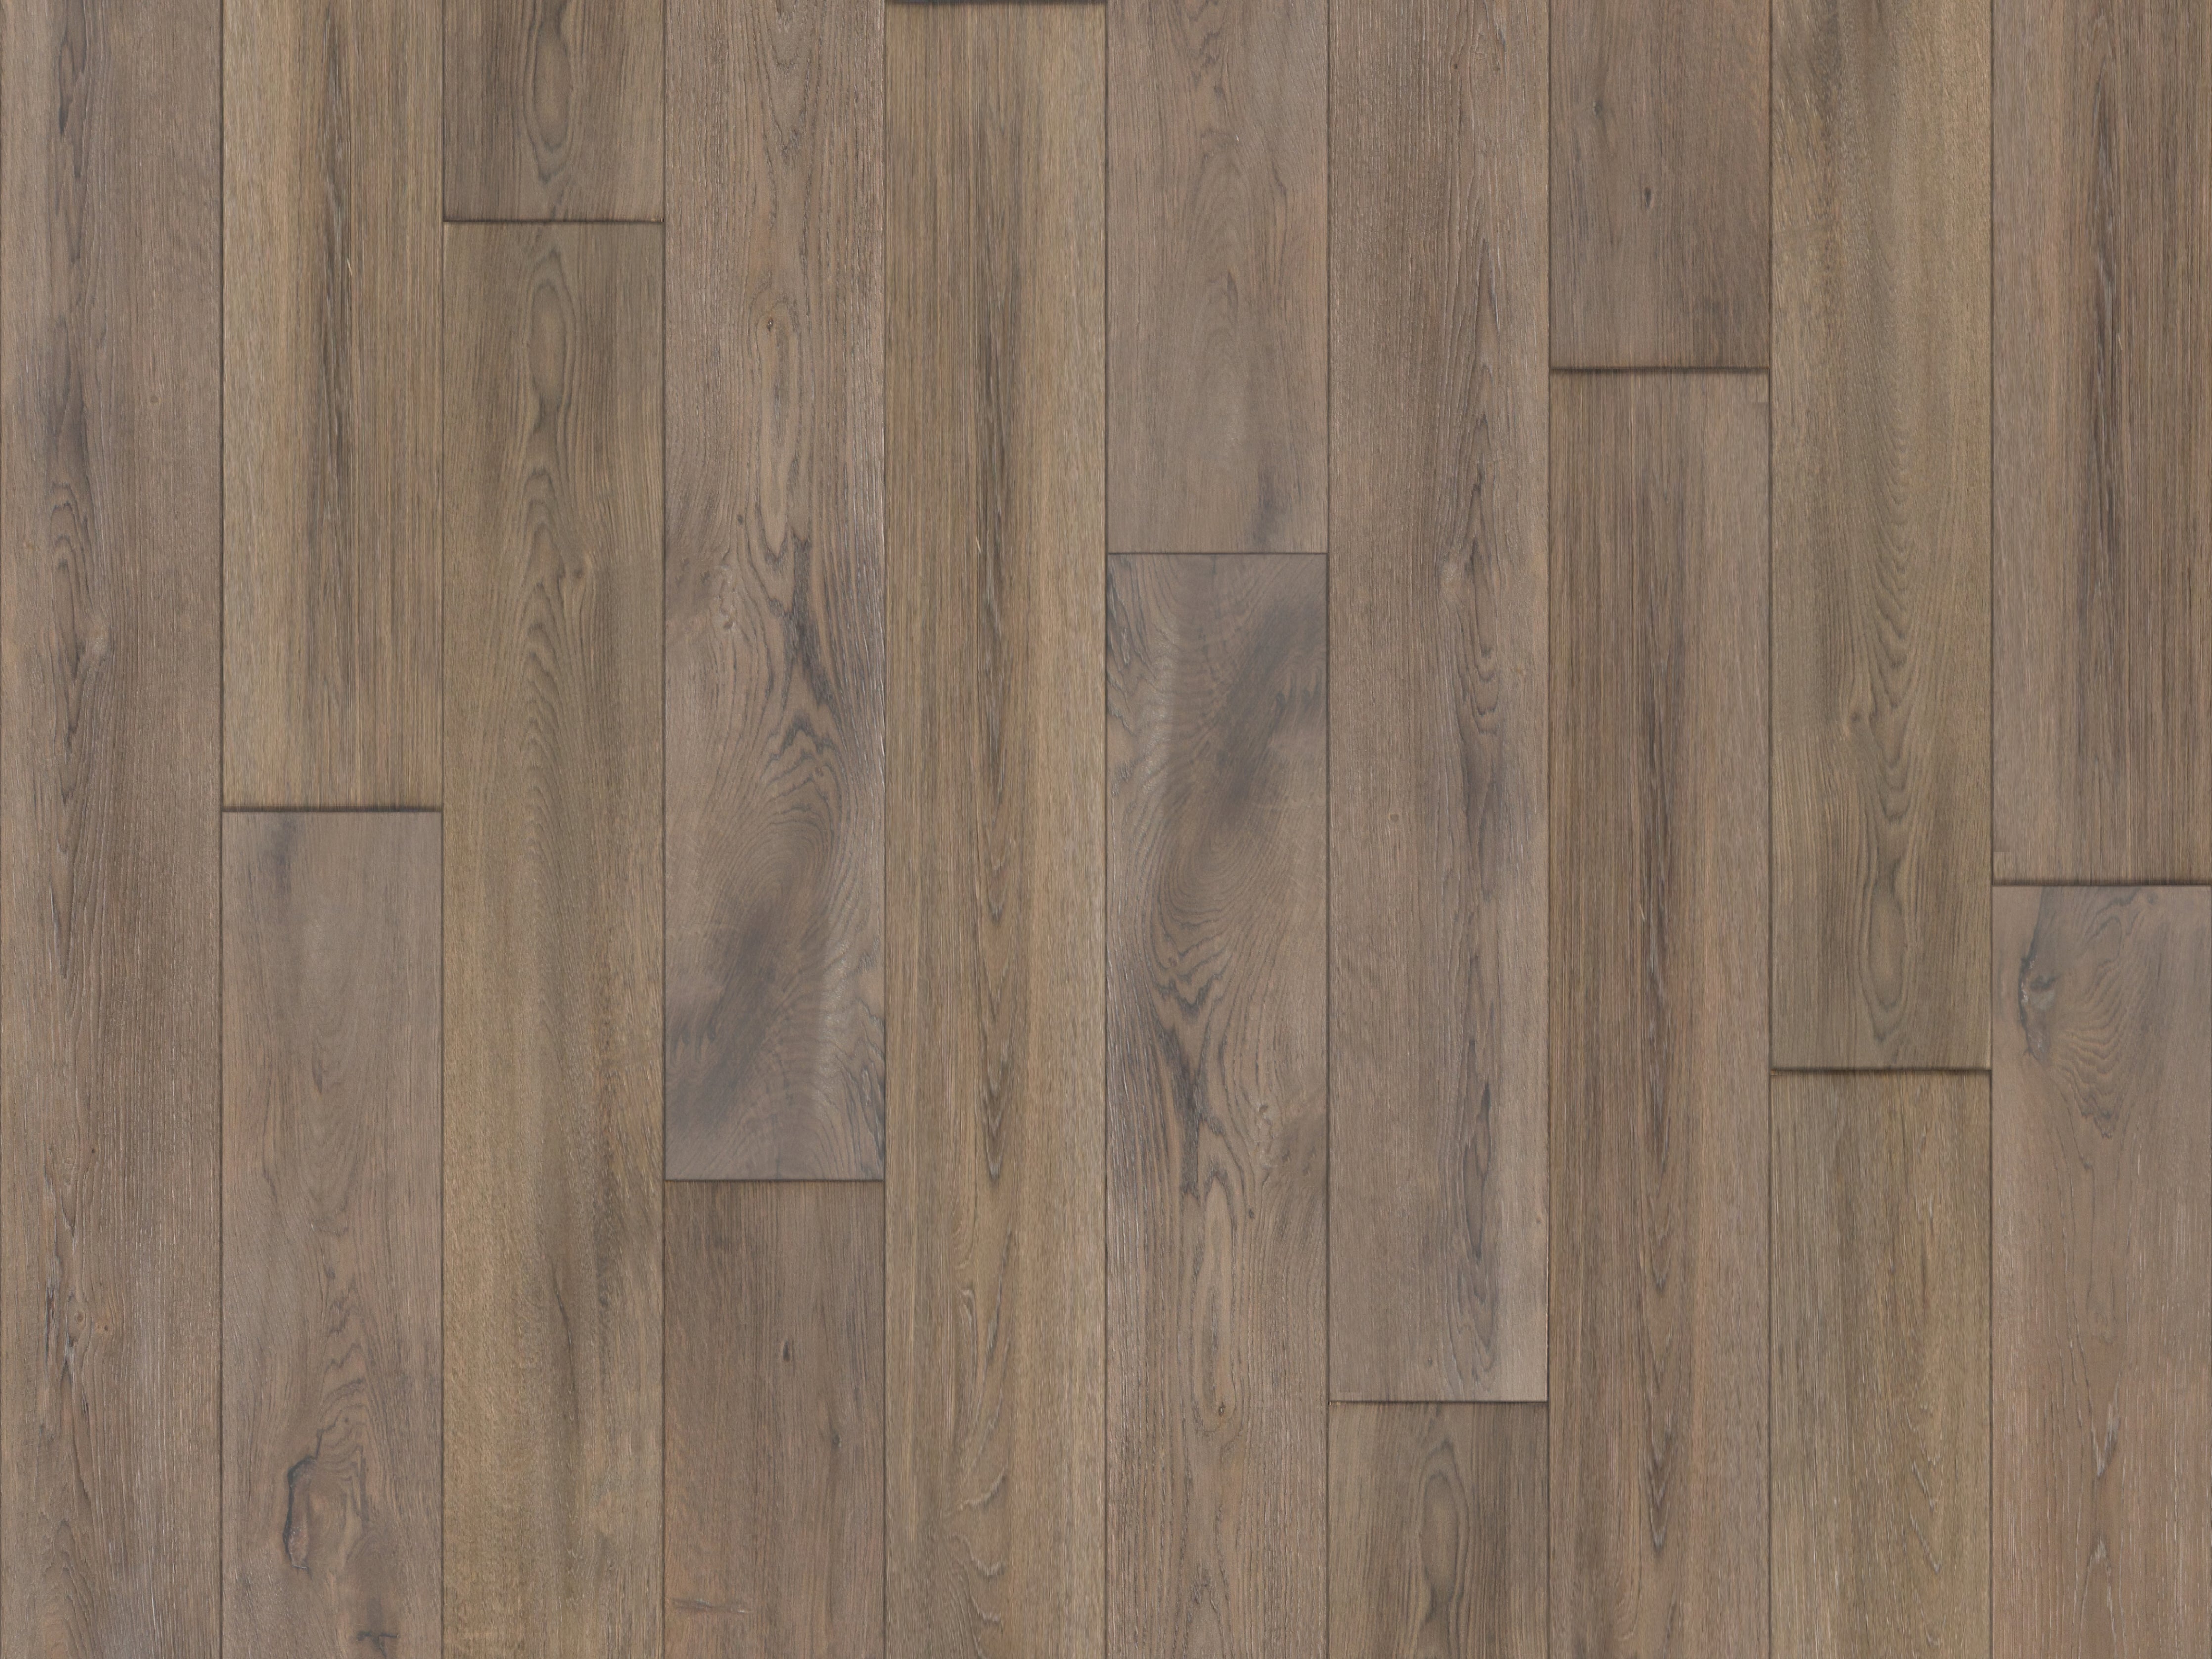 duchateau signature riverstone lys european oak engineered hardnatural wood floor hard wax oil finish for interior use distributed by surface group international